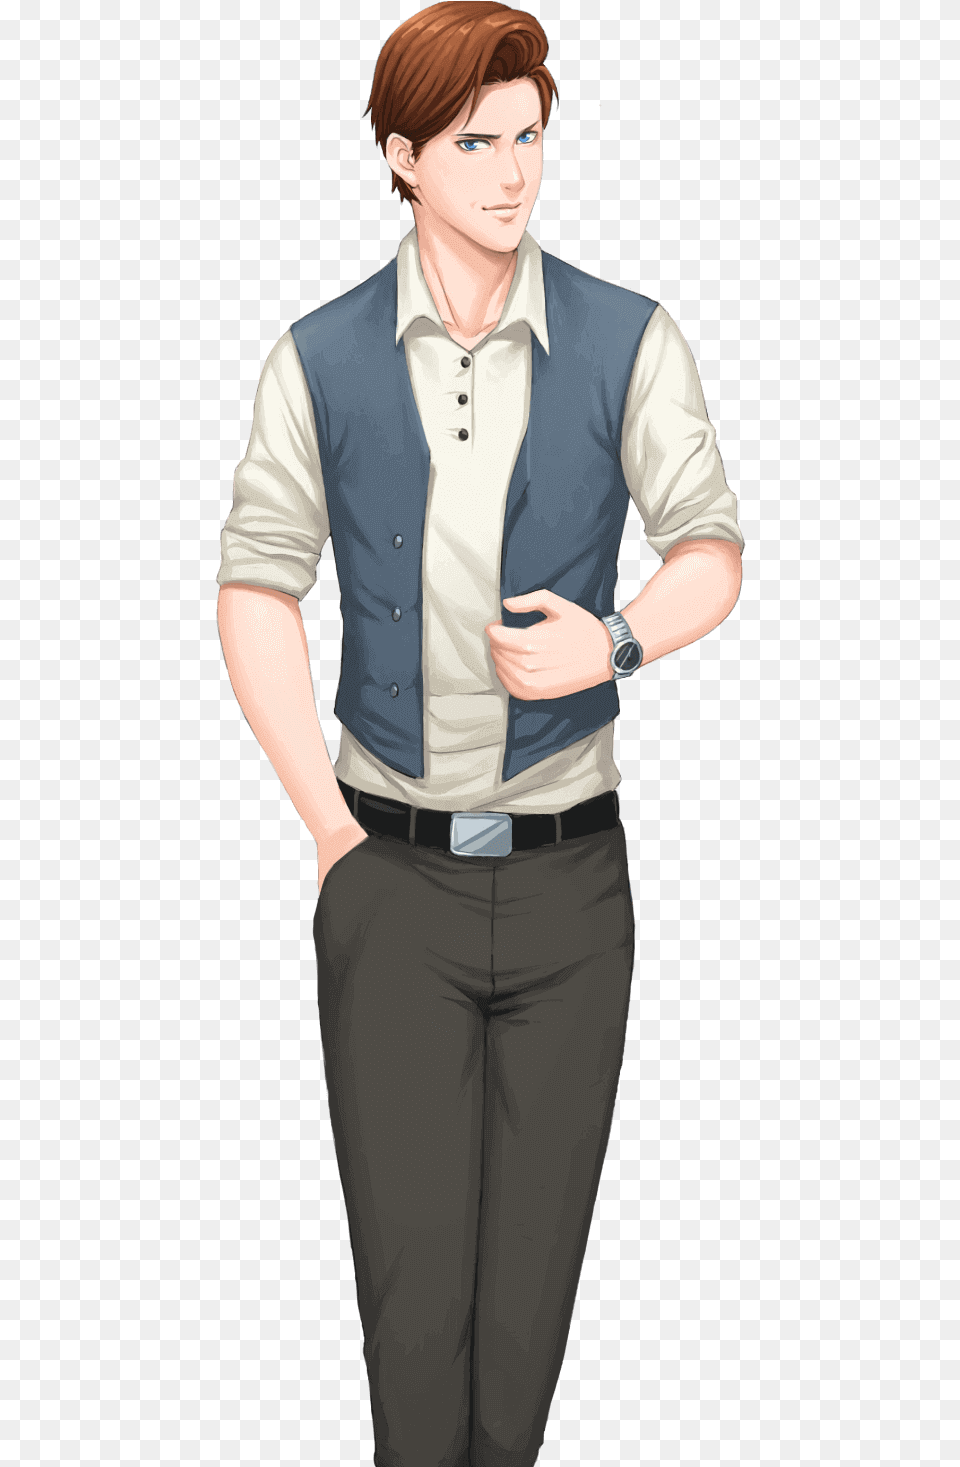 Risinglovers The Romantic Otome Game Rising Lovers Julien, Vest, Clothing, Shirt, Adult Free Png Download